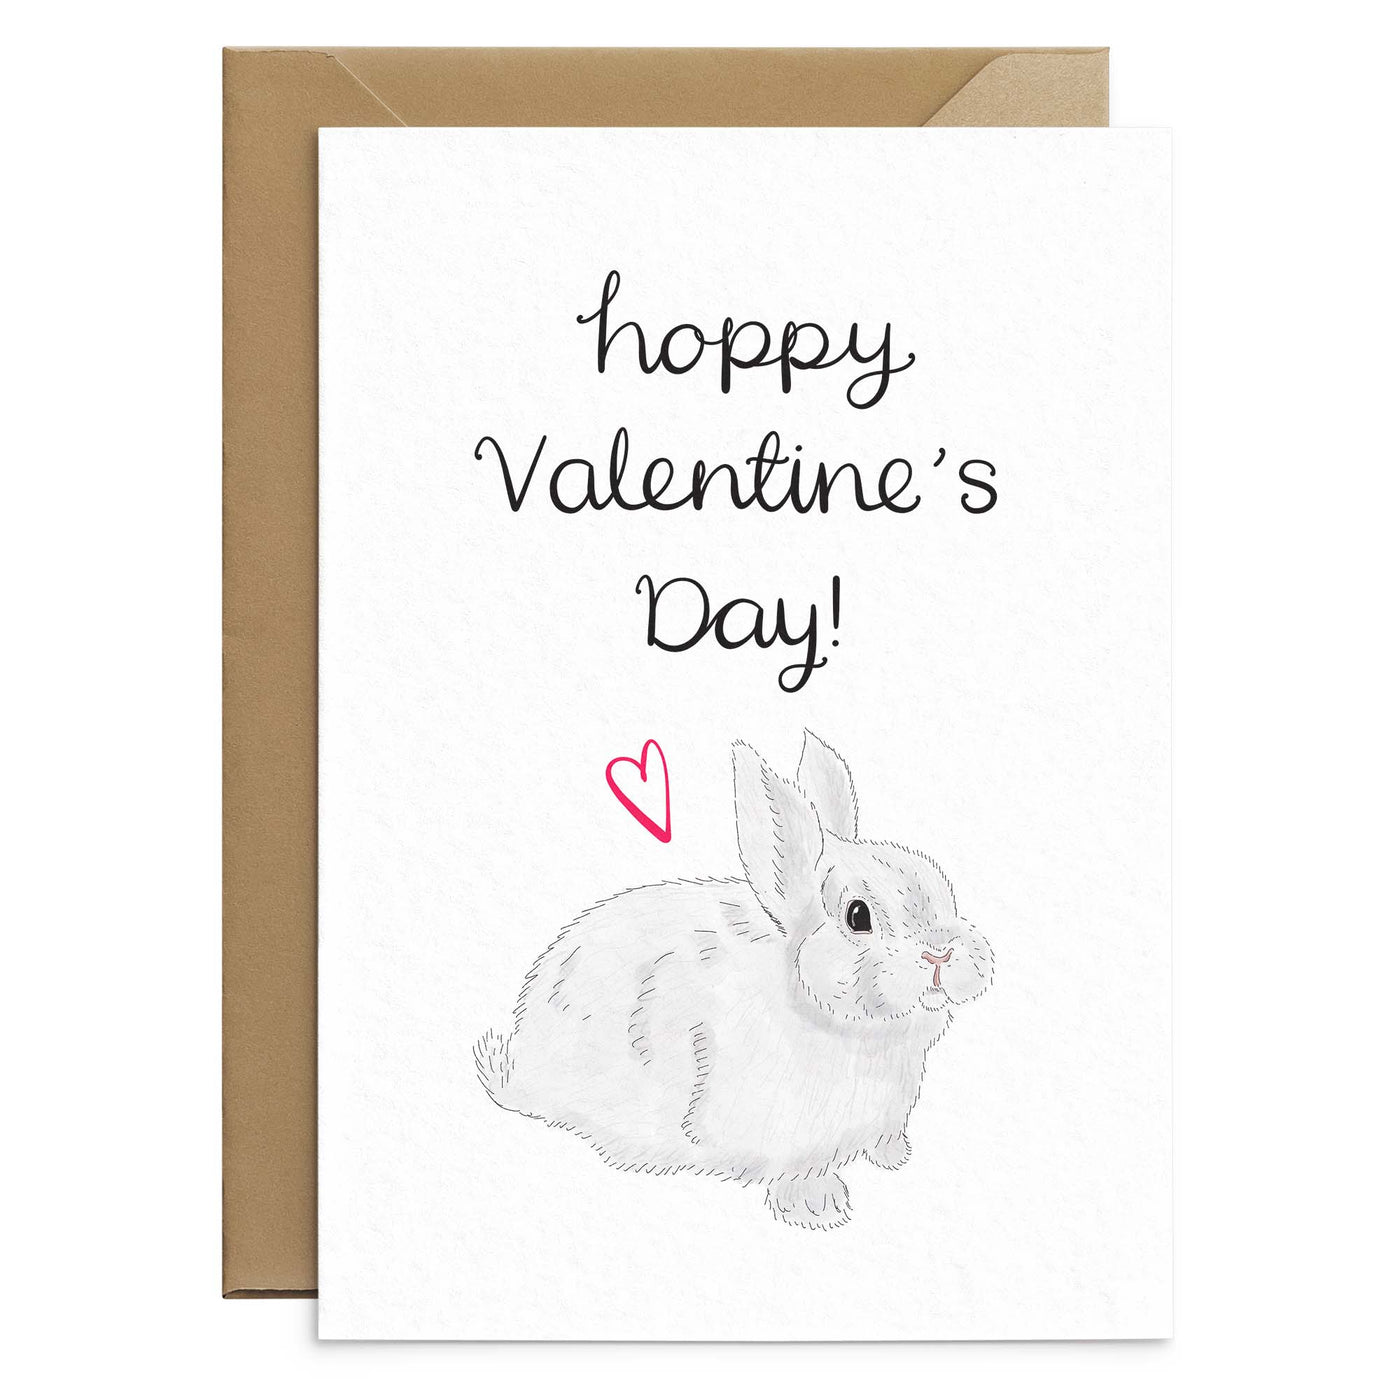 A cute bunny themed valentines day card. A white card has an illustration of a grey/white bunny, a small red love heart and black hand scripted text above that reads 'hoppy valentines day!'. Behind the card is a brown Kraft envelope. Greetings card by Poppins and co.